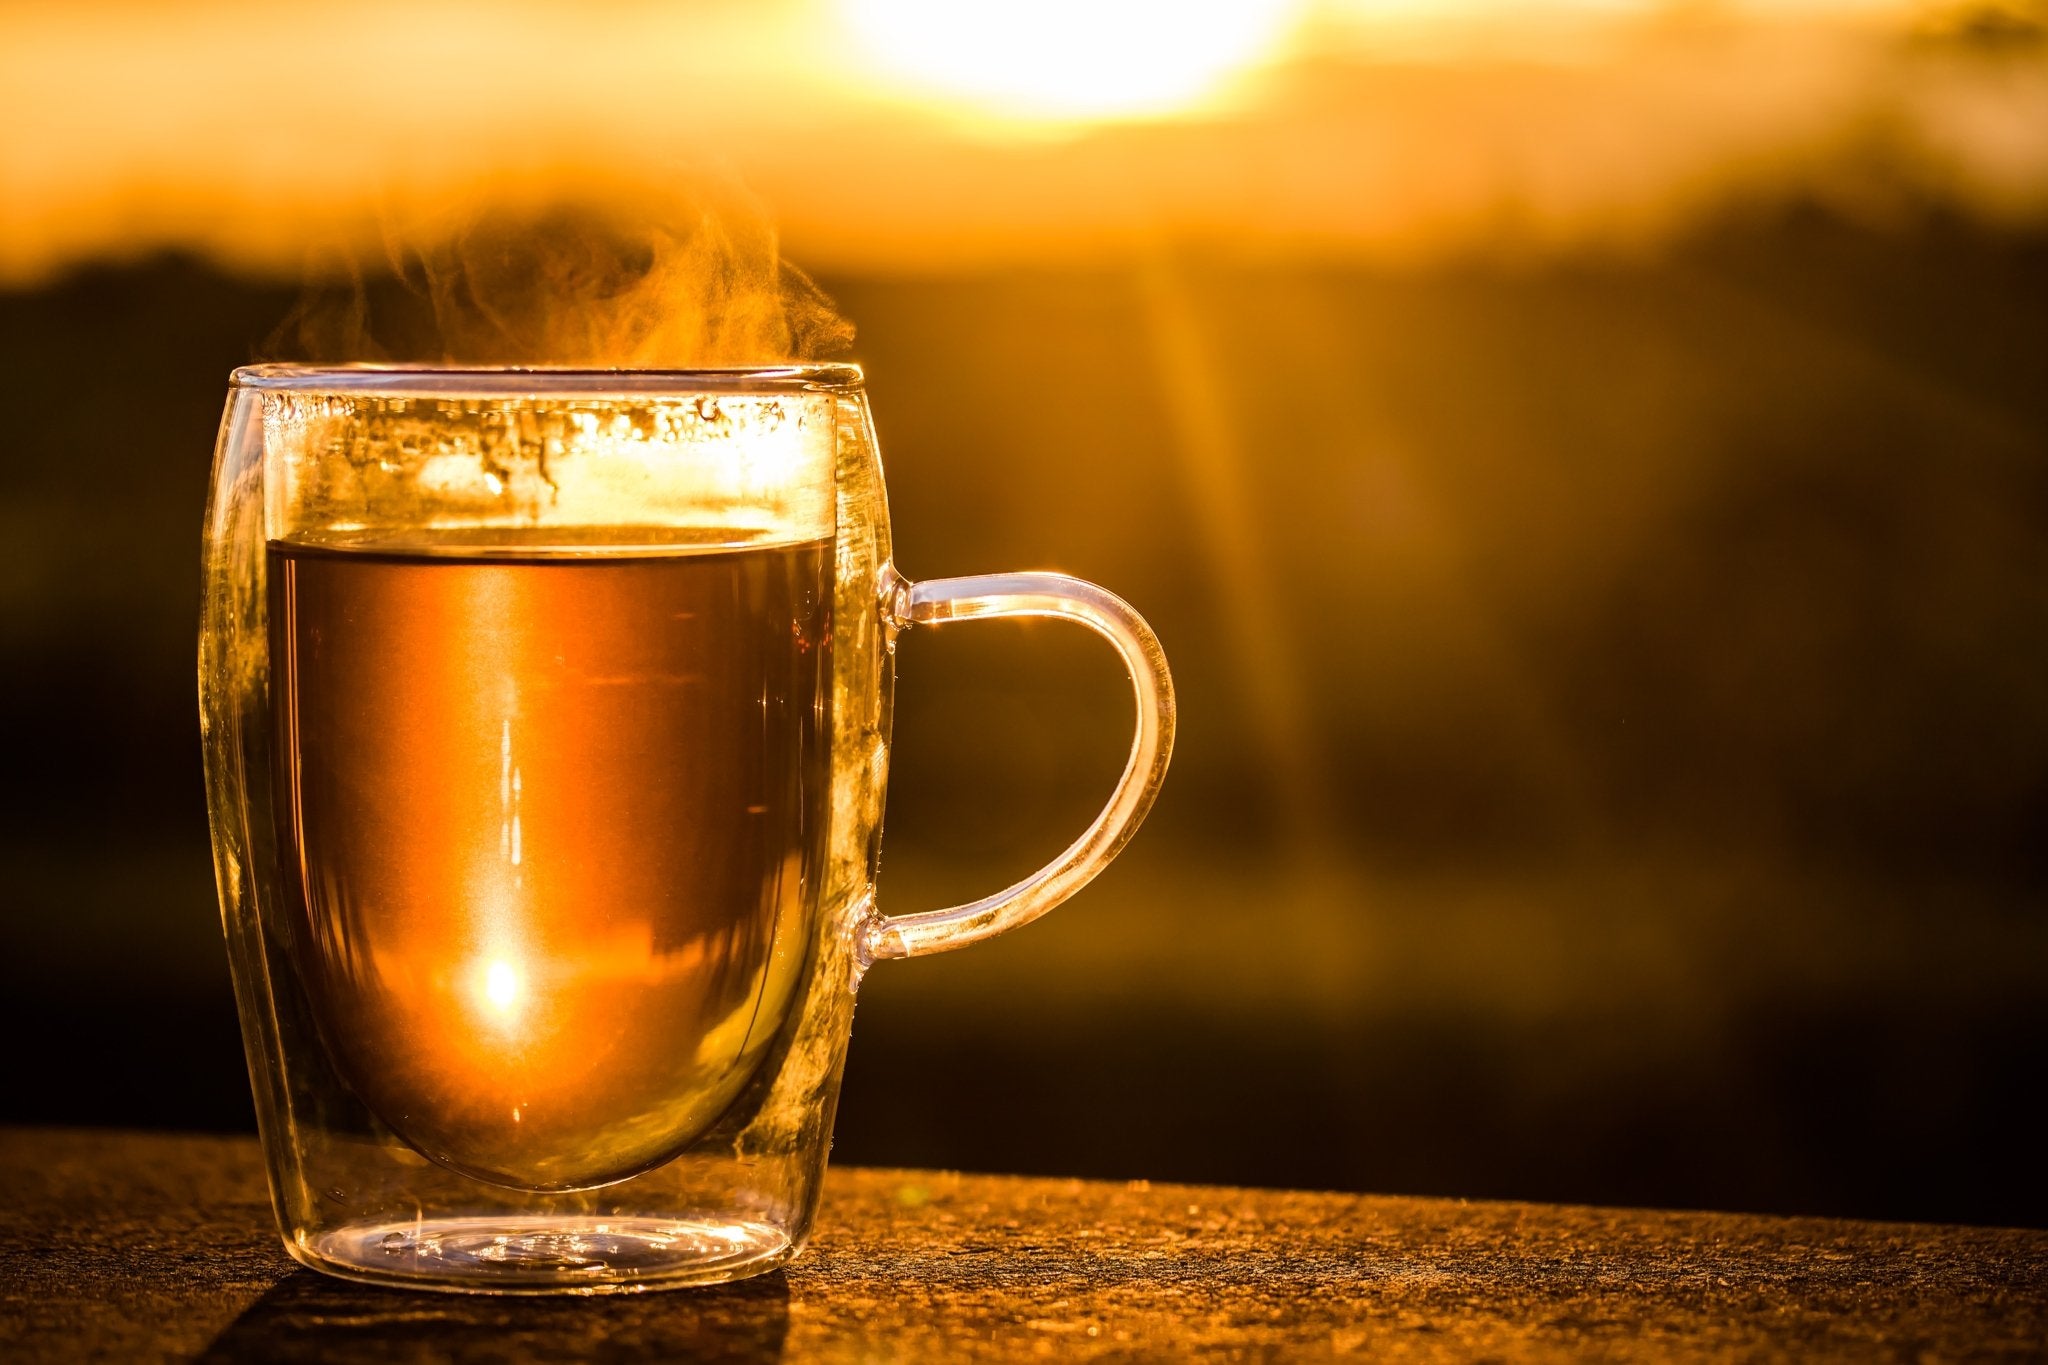 Here Are The Top 10 Teas To Get You Through Quarantine, Boost Your Natural Beauty, And Detox Your Body & Mind - Loose Leaf Tea Market